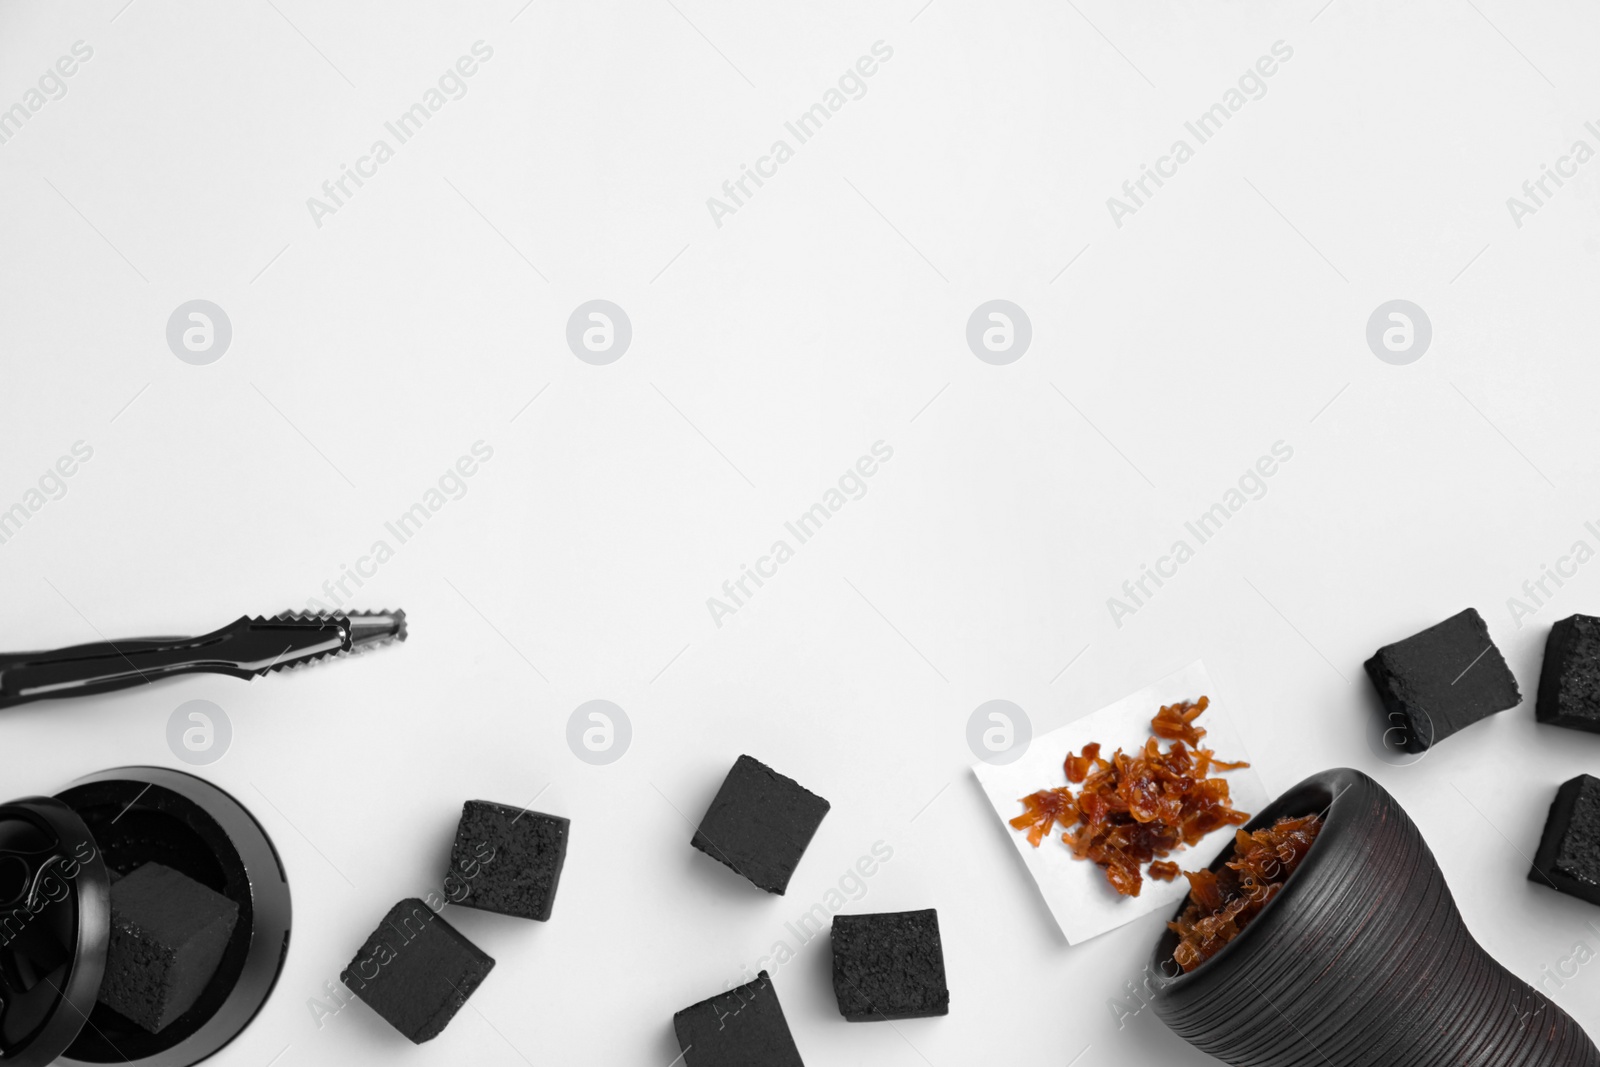 Photo of Hookah parts with tobacco and charcoals on white background, top view